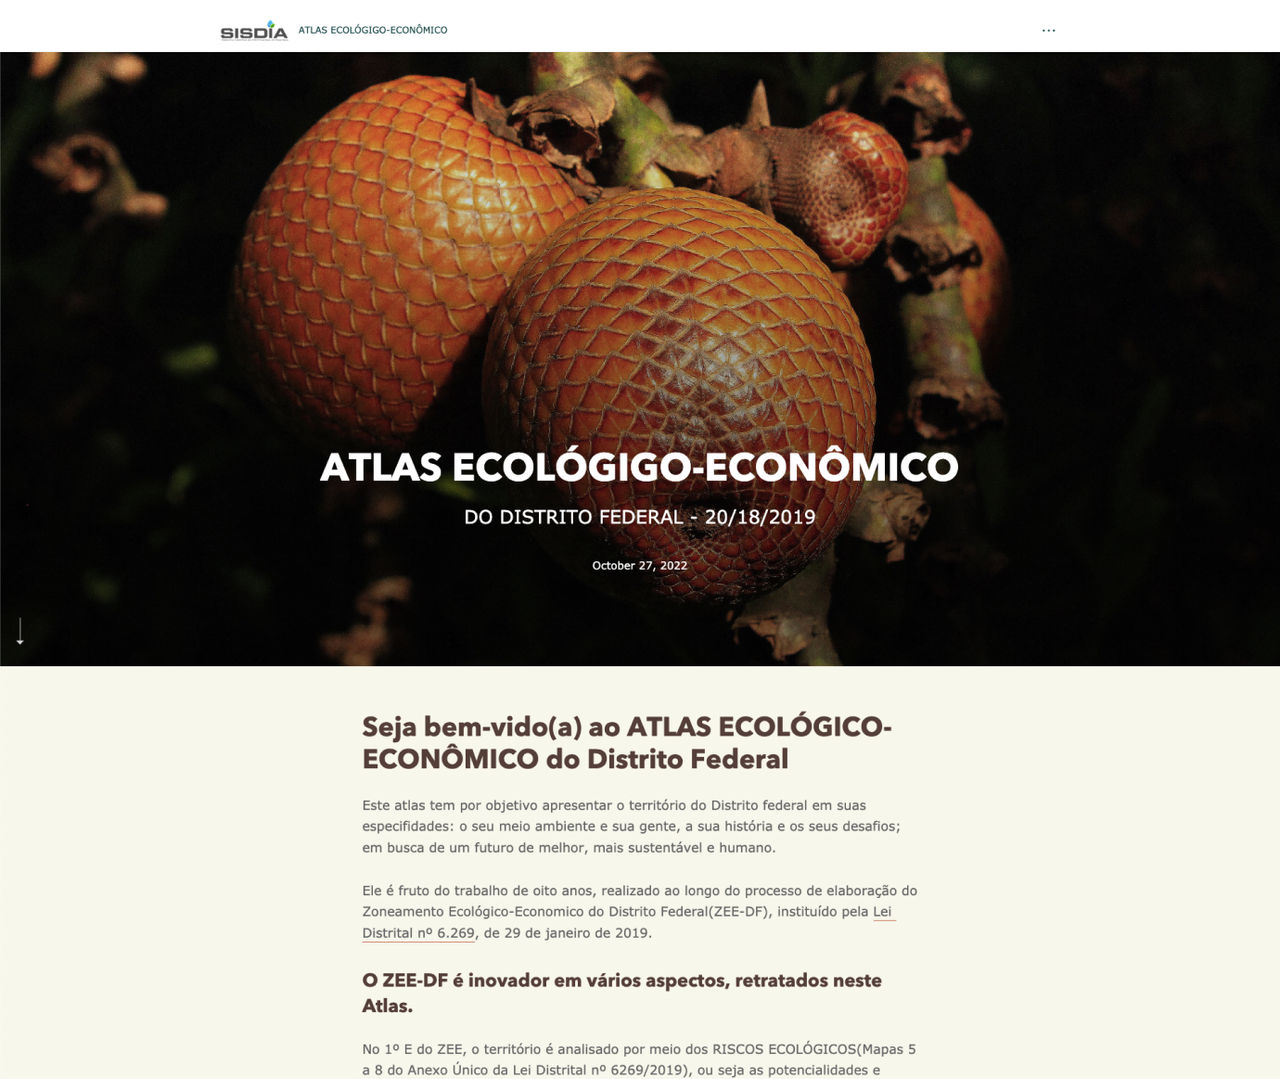 Screenshot of the Federal District's Ecological-Economic Atlas data accessible on the SISDIA site